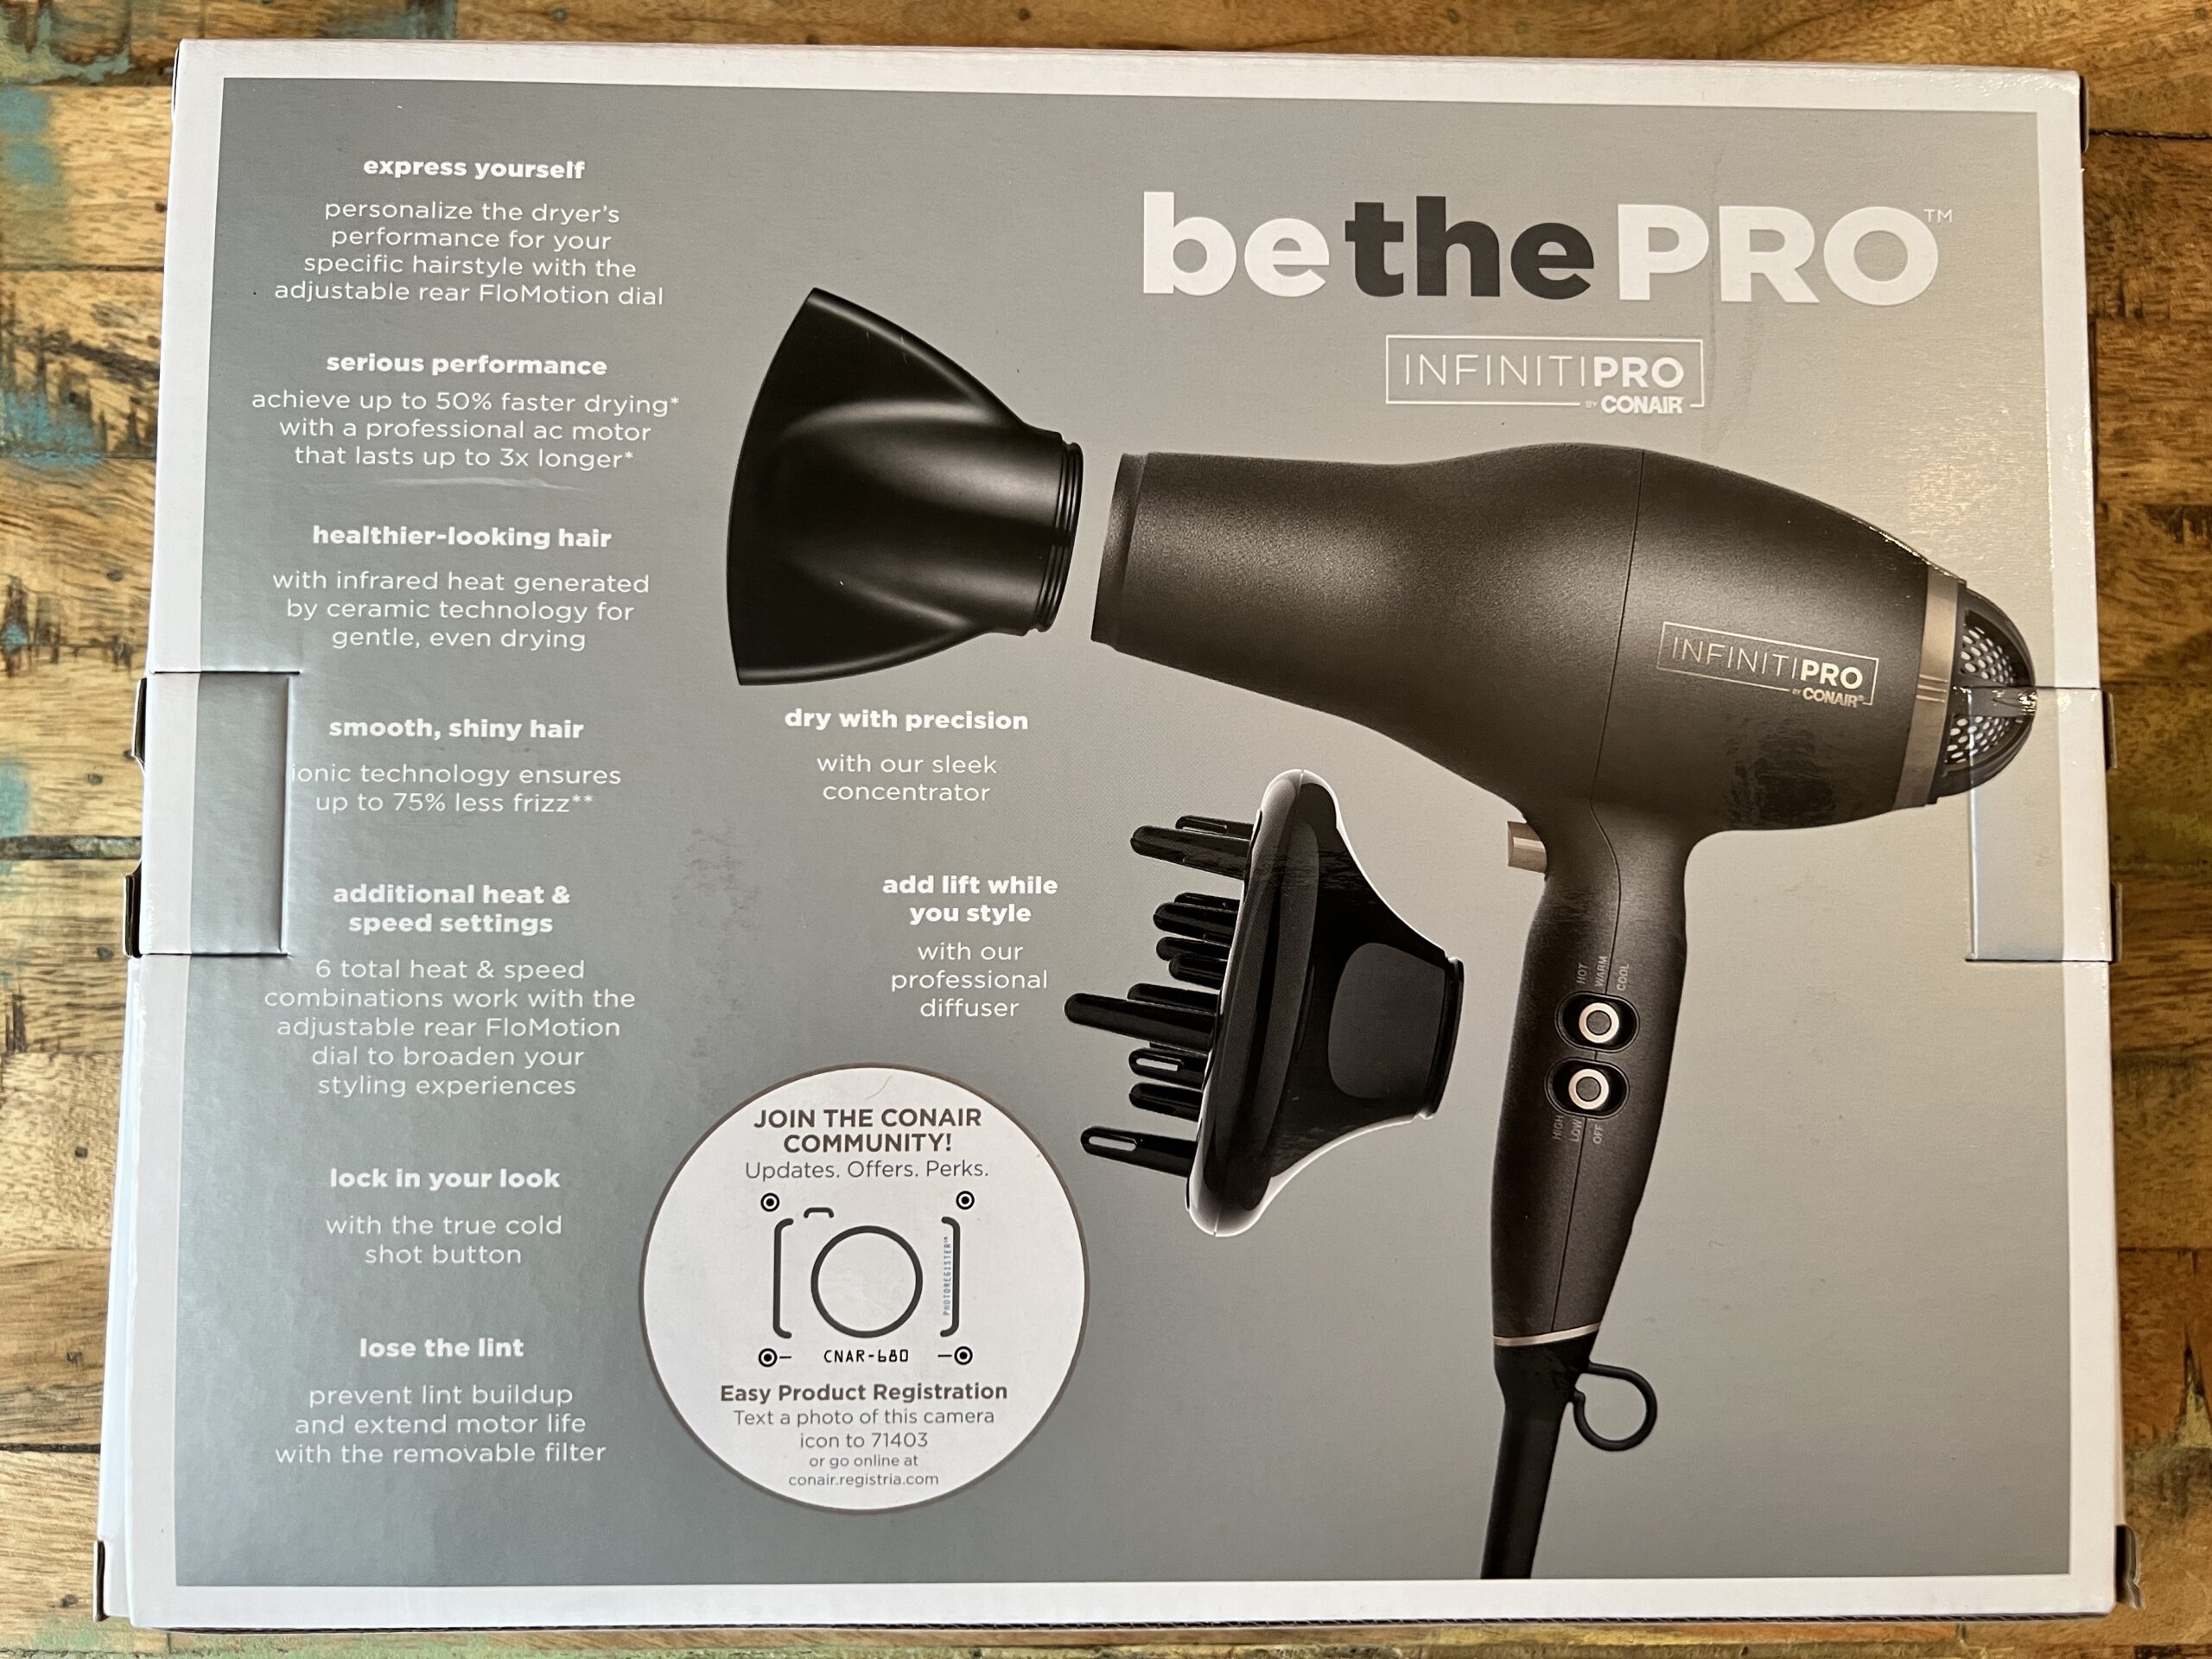 Be the pro with the InfinitiPro hair dryer that uses ionic technology to ensure up to 75% less frizz than comparable dryers and allows you to achieve up to 50% faster drying with a professional AC motor that lasts up to 3x longer.